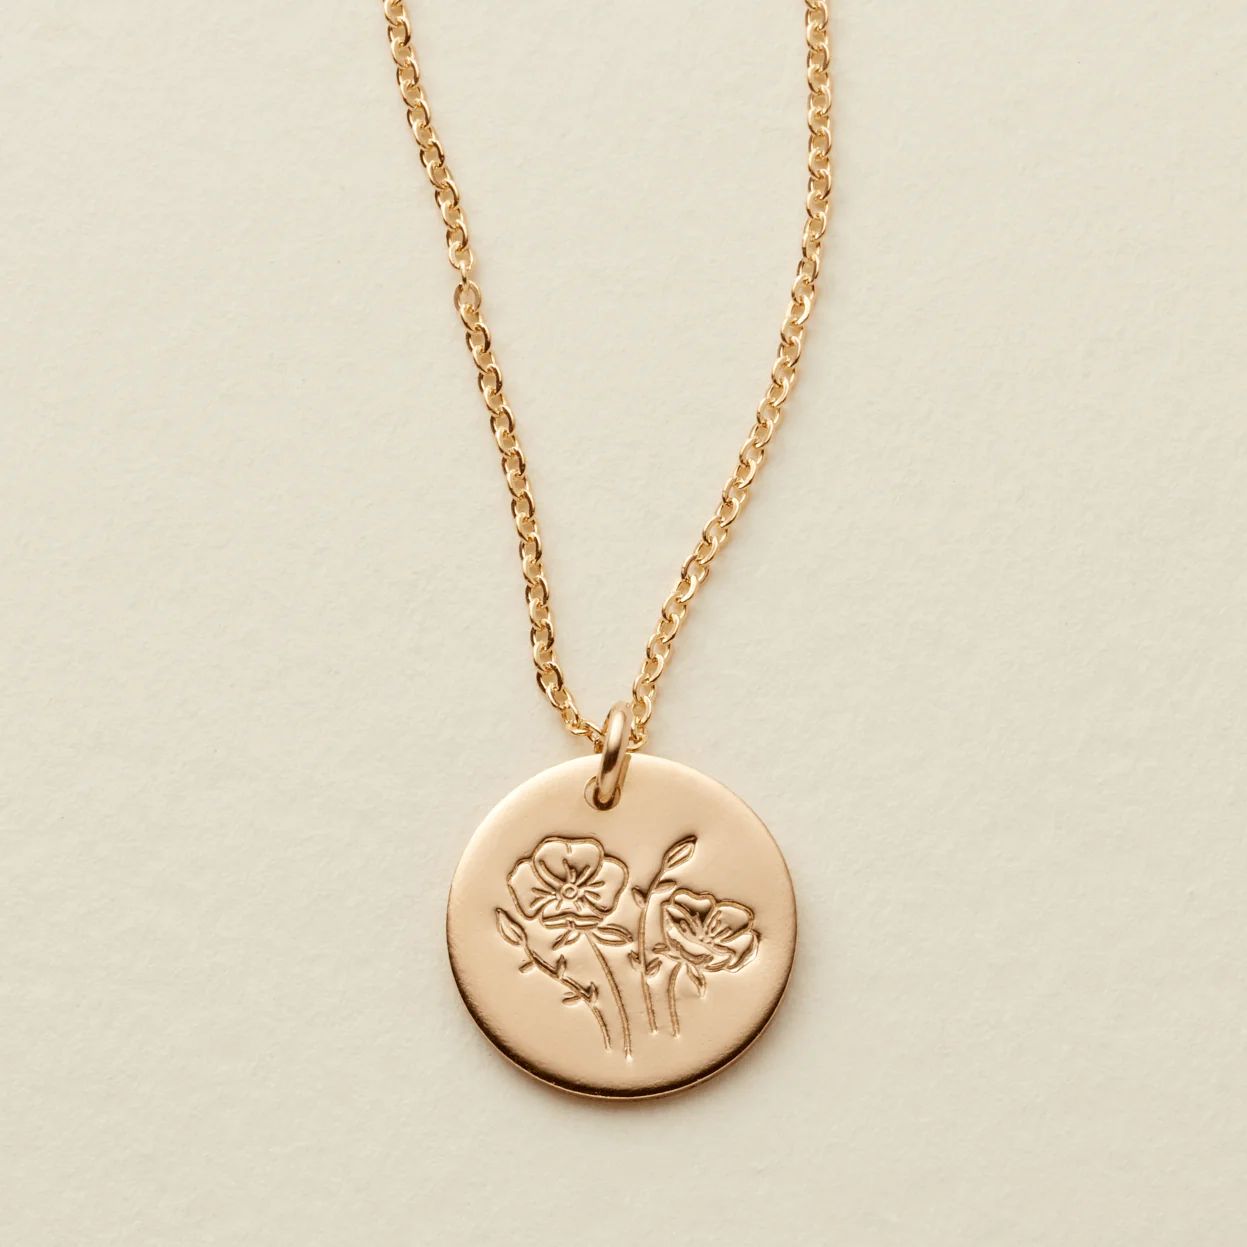 August Birth Flower Necklace | Gold, Rose Gold, Silver | Birth Flower Necklace | Made by Mary (US)